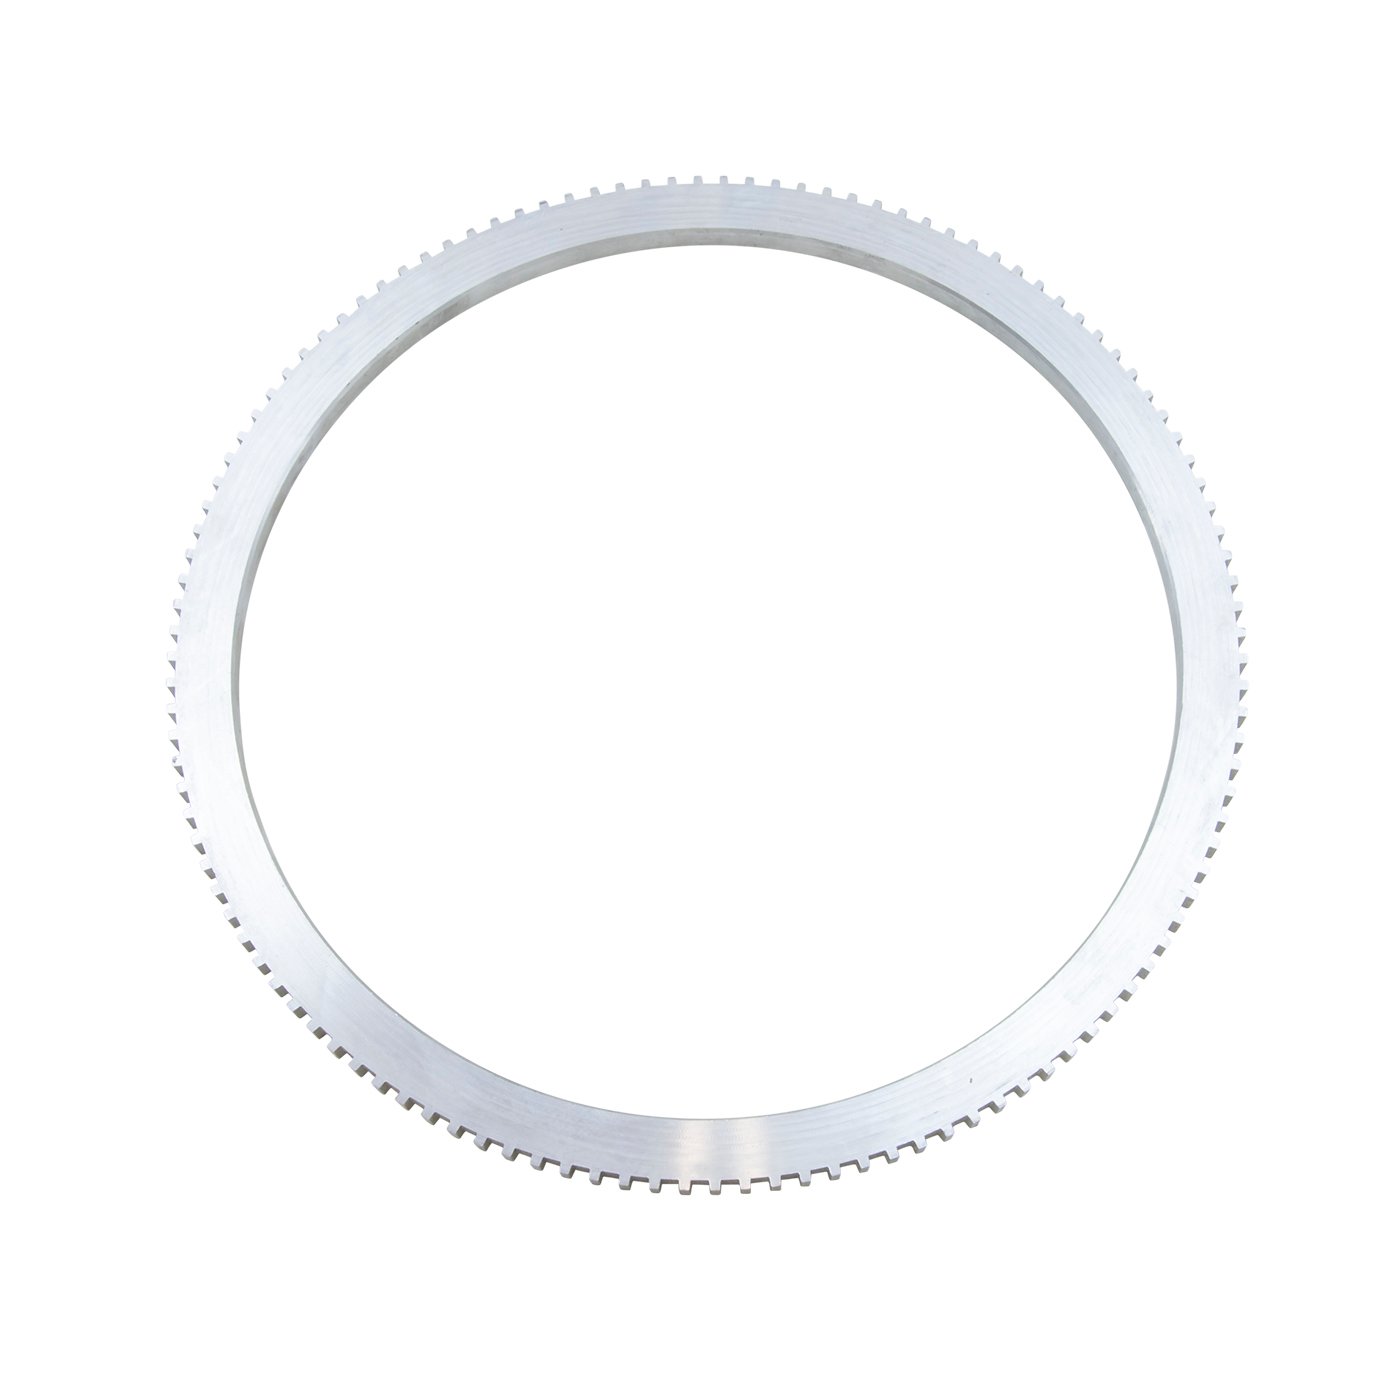 Abs Tone Ring For Spicer S111, 4.44 & 4.88 Ratio